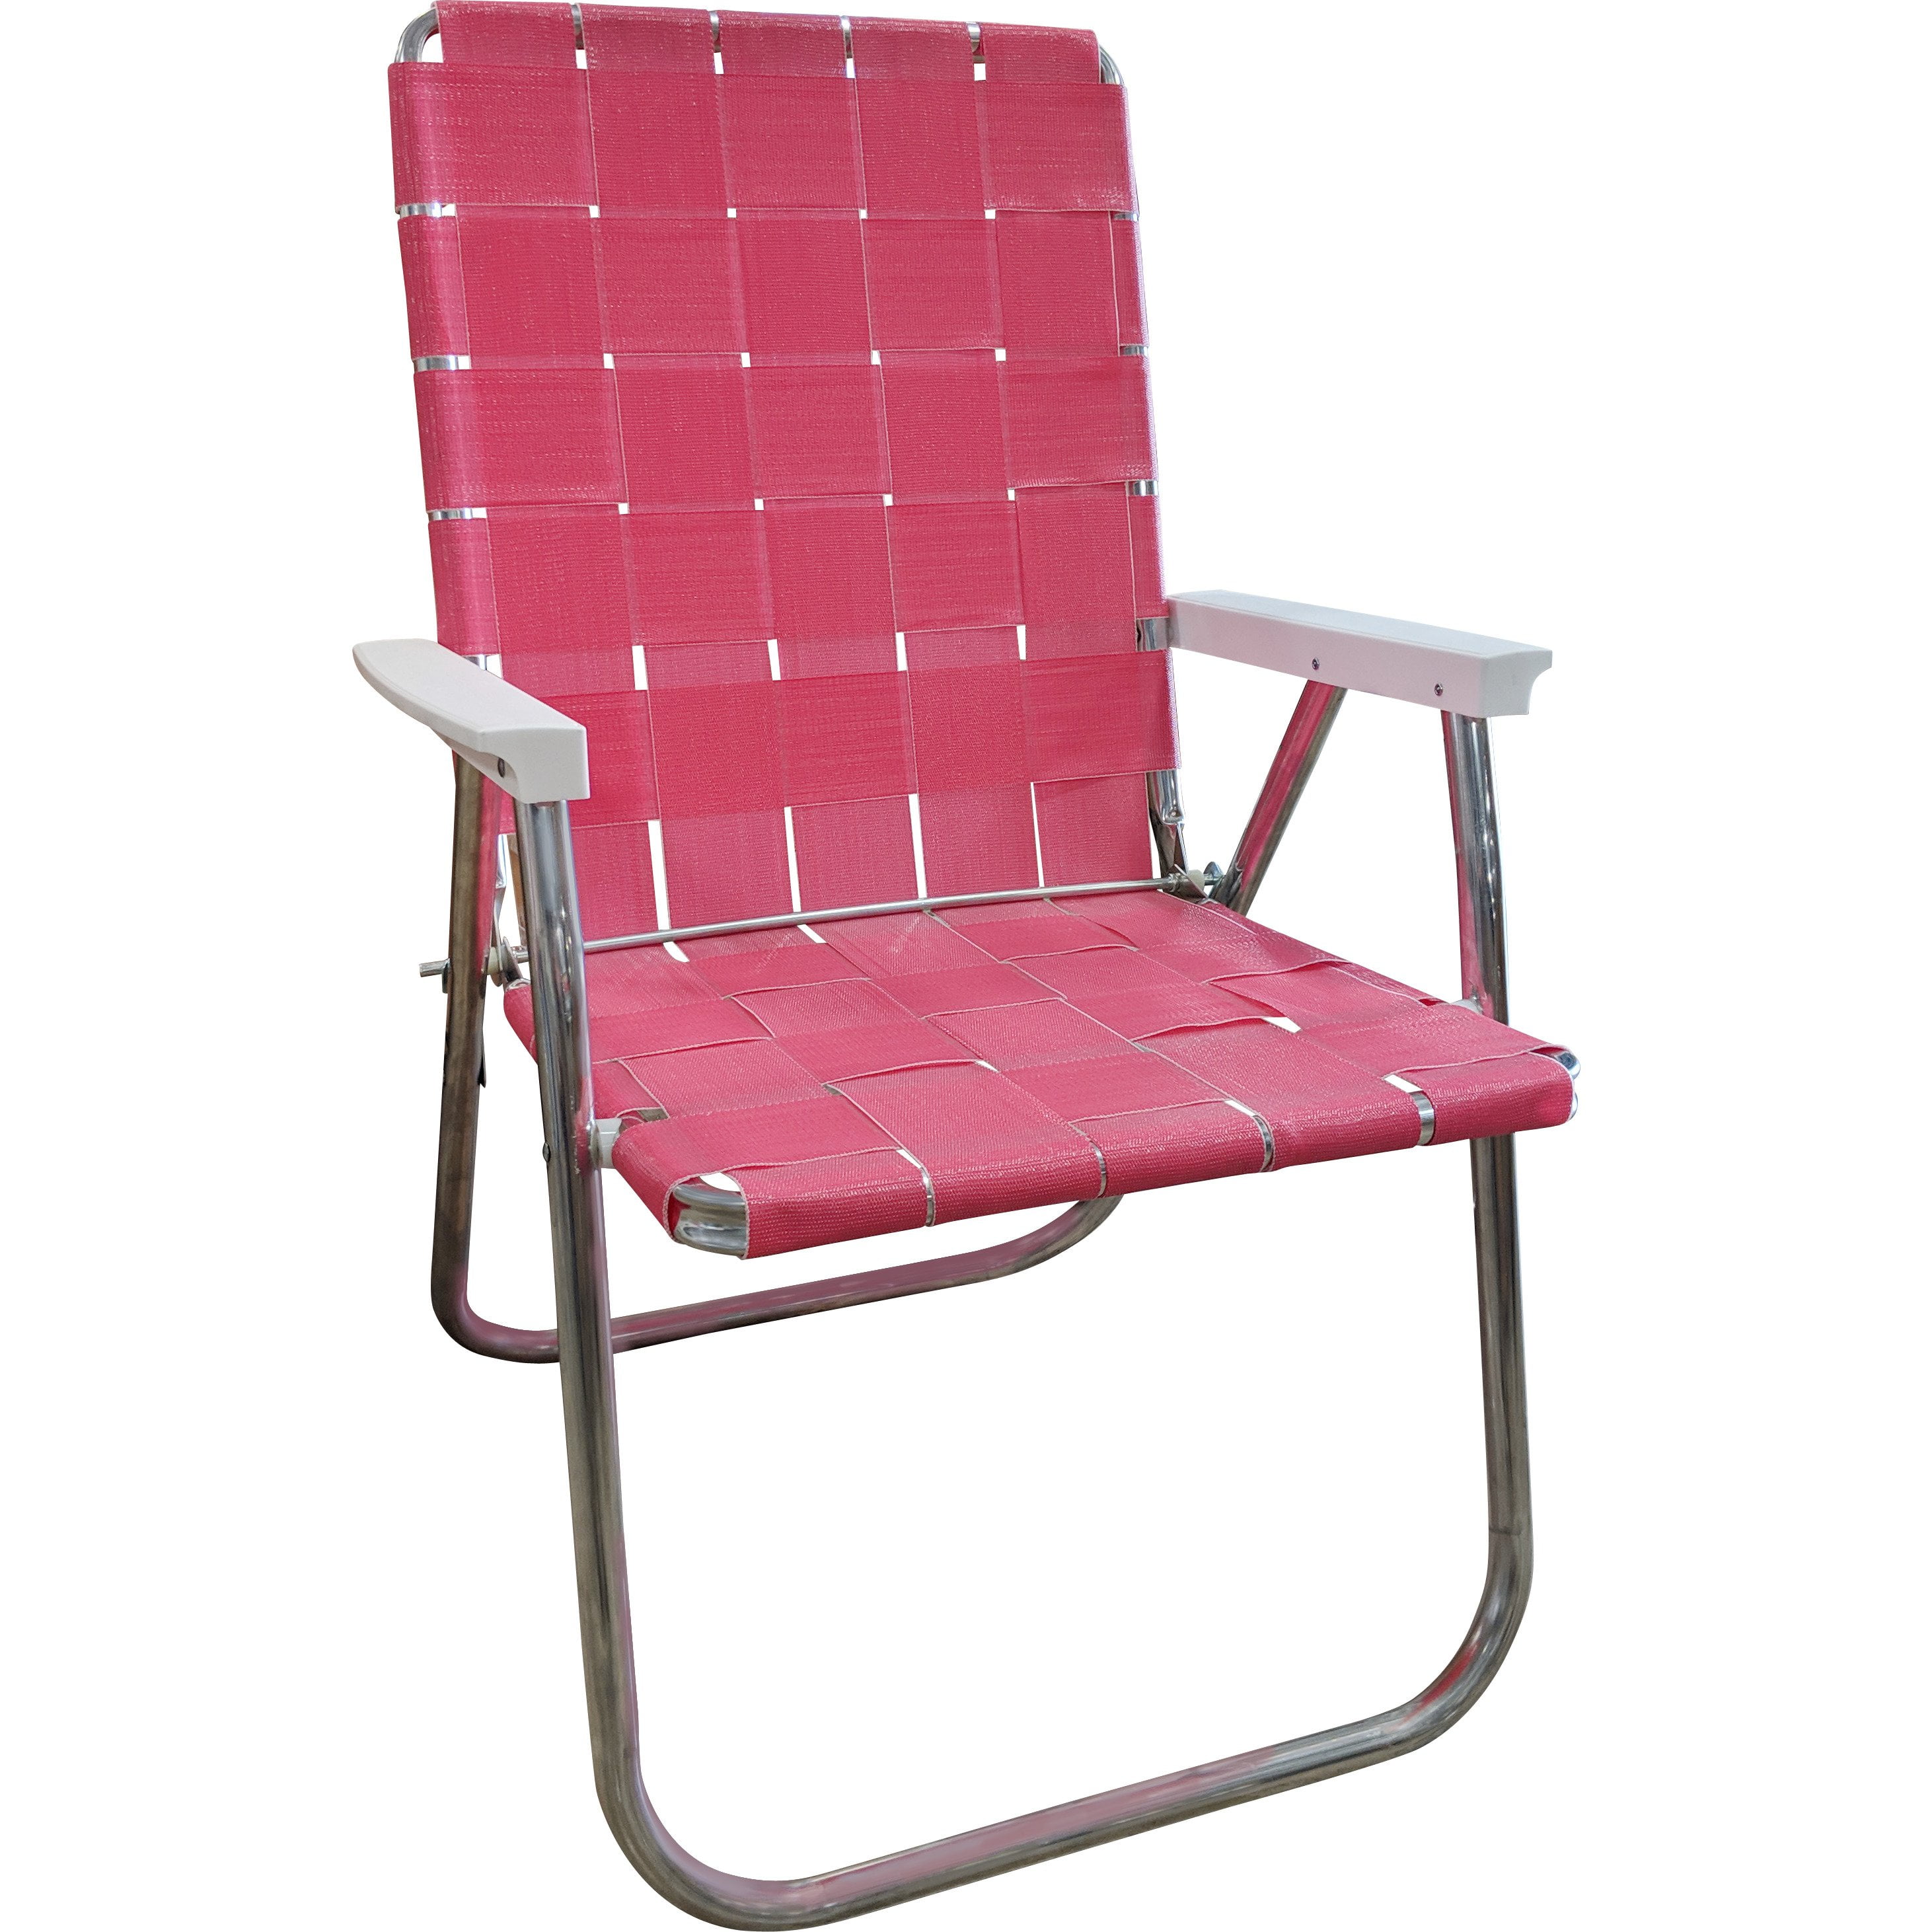 New Folding Chairs Outdoor Walmart for Large Space